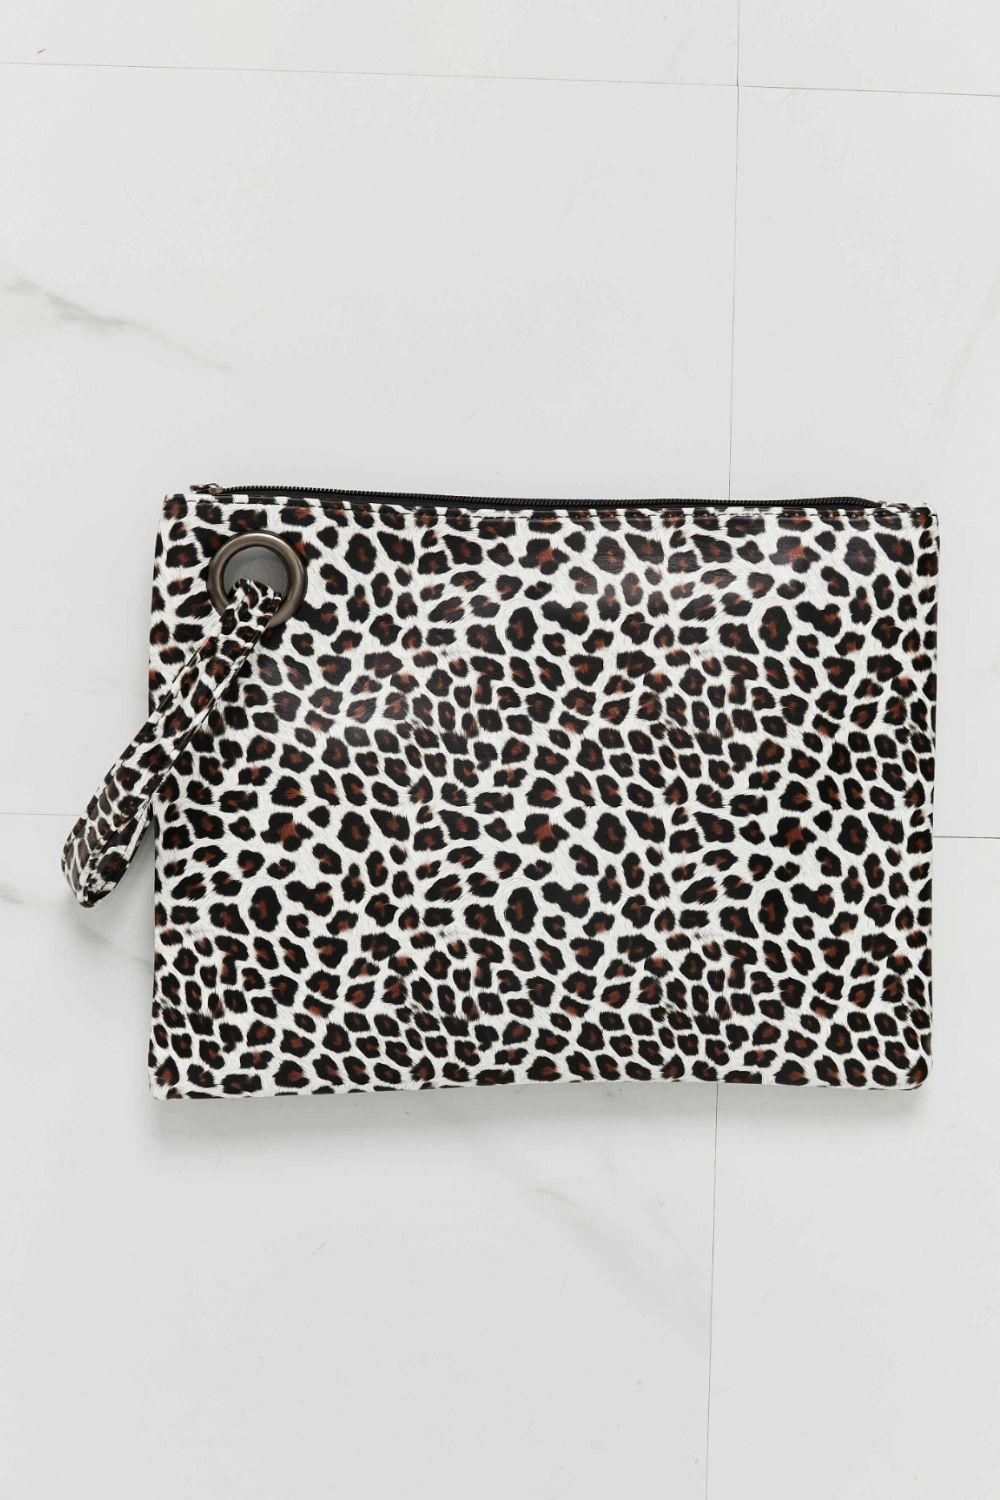 Make It Your Own Printed Wristlet